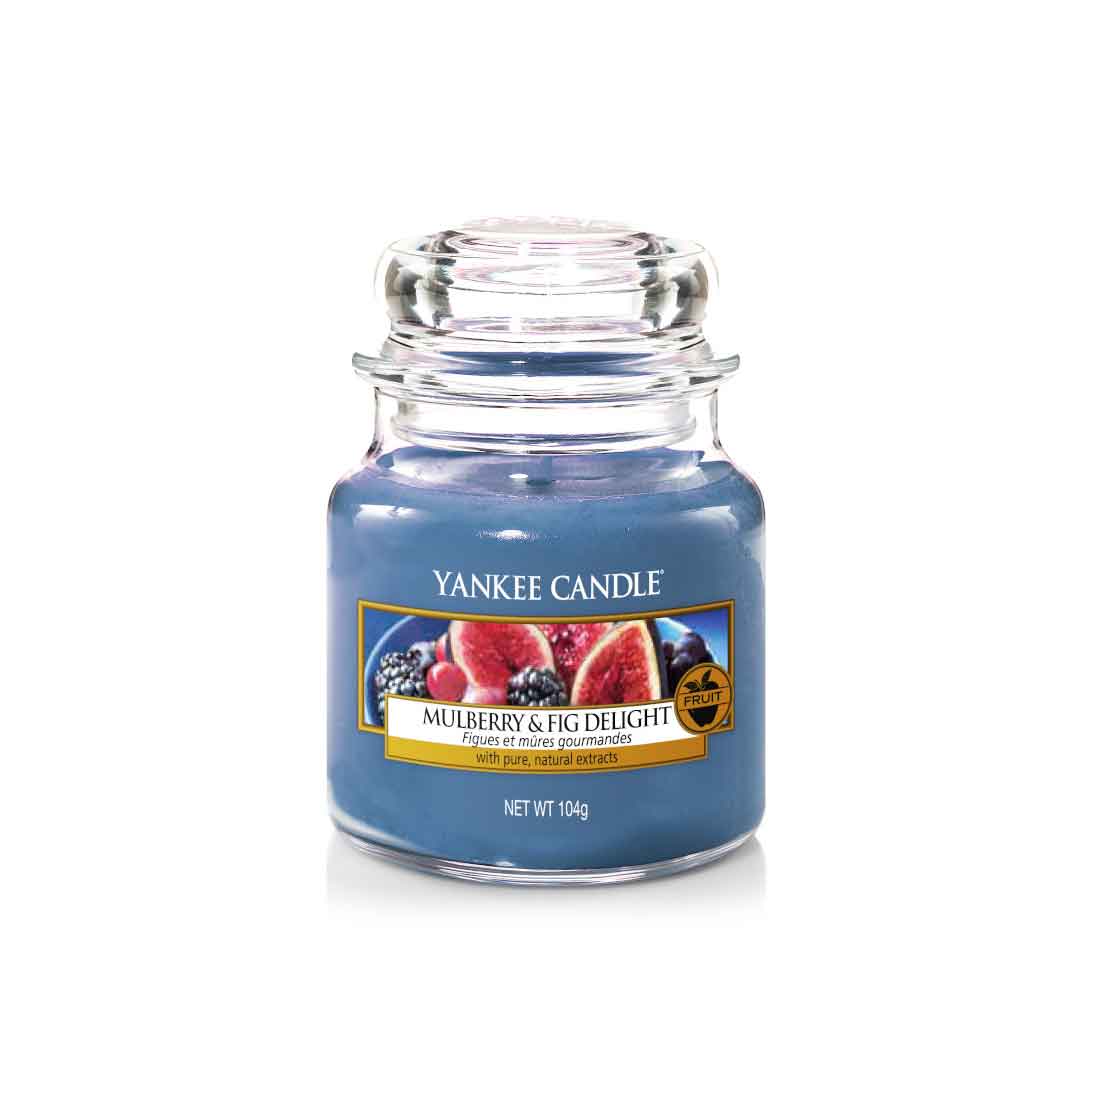 Yankee Candle Mulberry & Fig Delight Giara Piccola